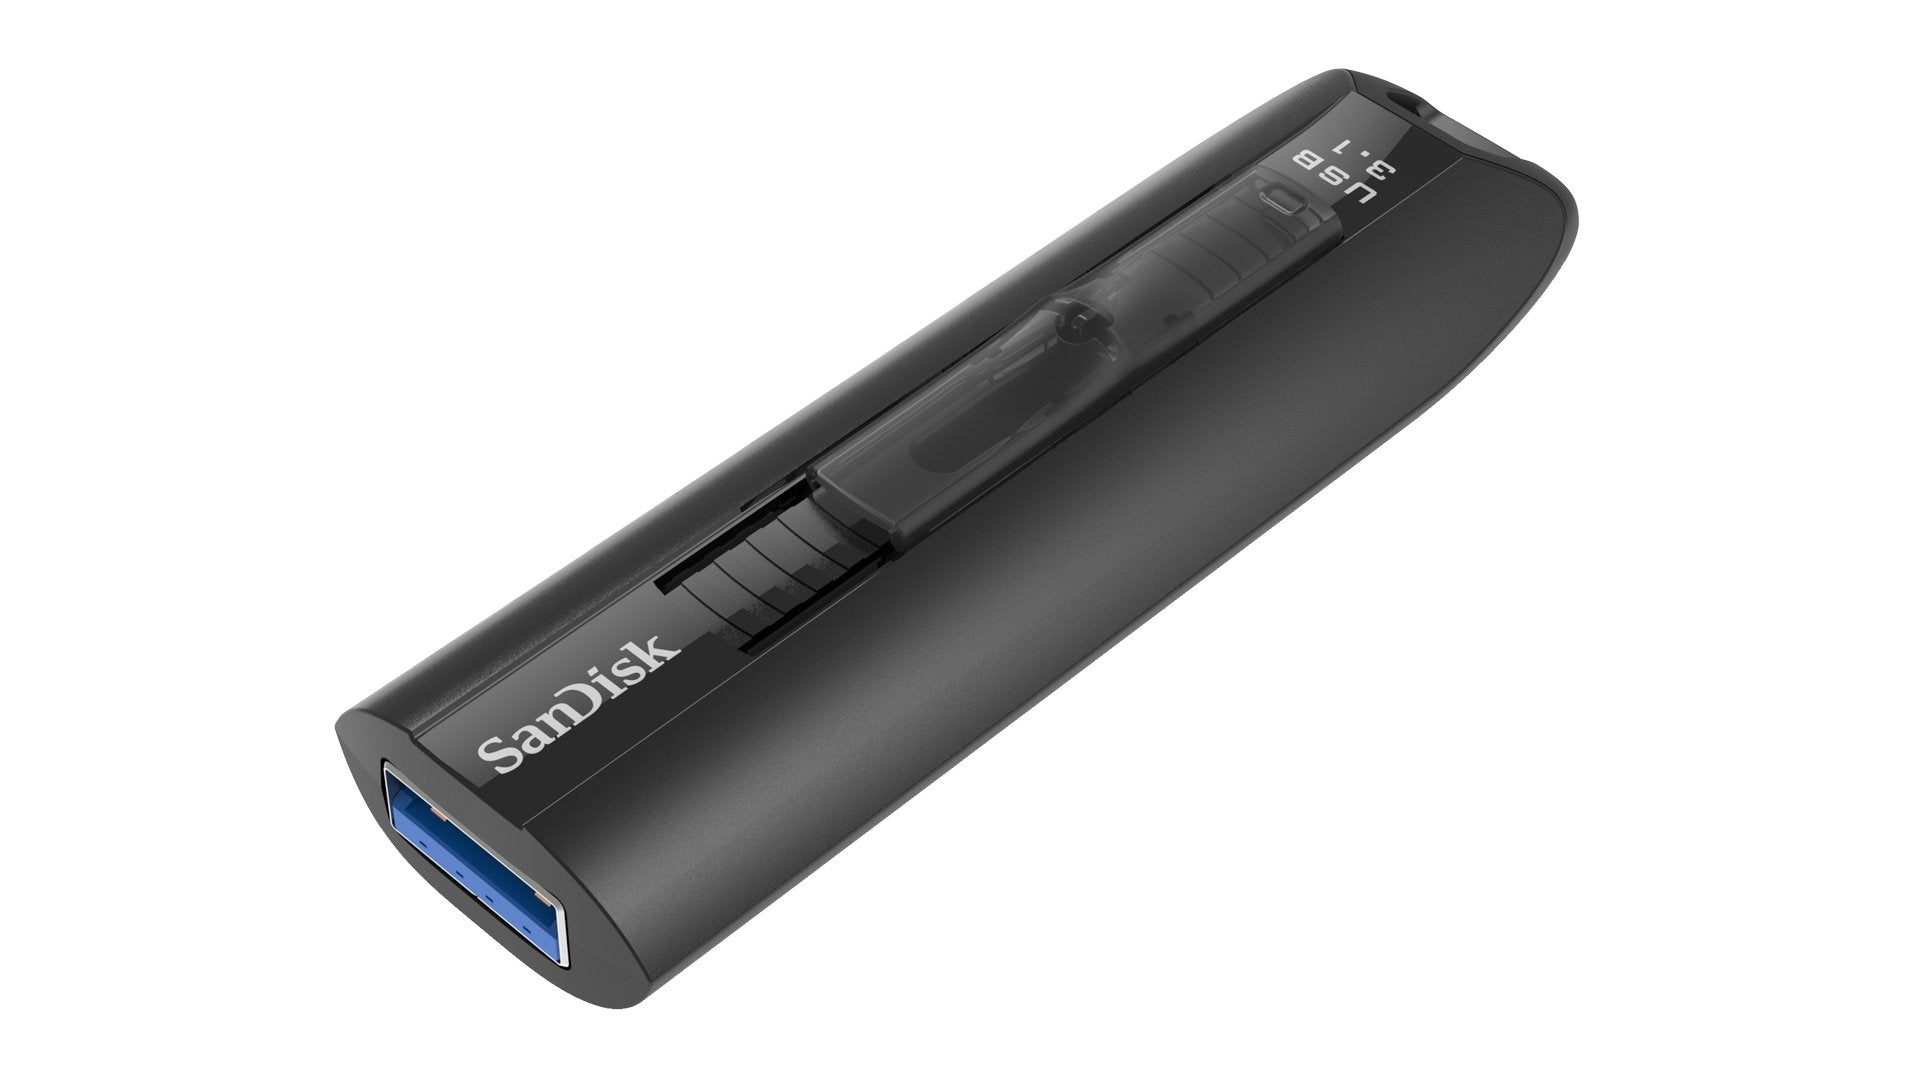 SanDisk Extreme Go 64GB USB 3.1 Flash Drive, 200MB/s Read & 150MB/s Write Speed